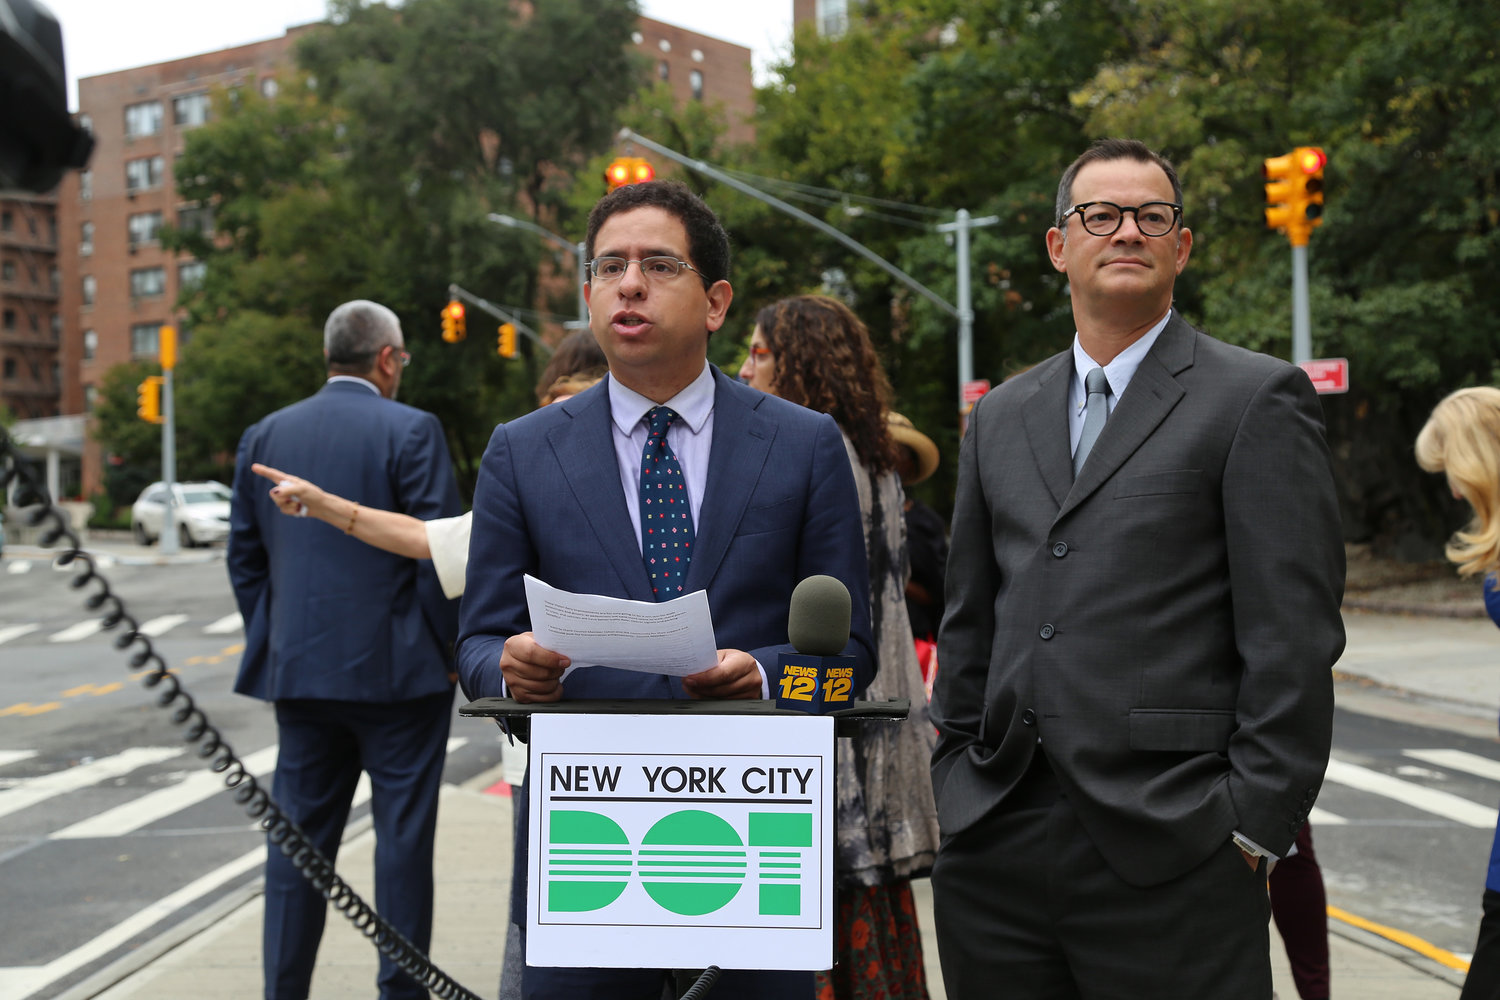 New state transportation deputy secretary Nivardo Lopez was the Bronx borough transportation commissioner at the city level for more than six years. Lopez recalls fondly working closely with Community Board 8, even when more contentious matters sometimes made that relationship a rocky one.